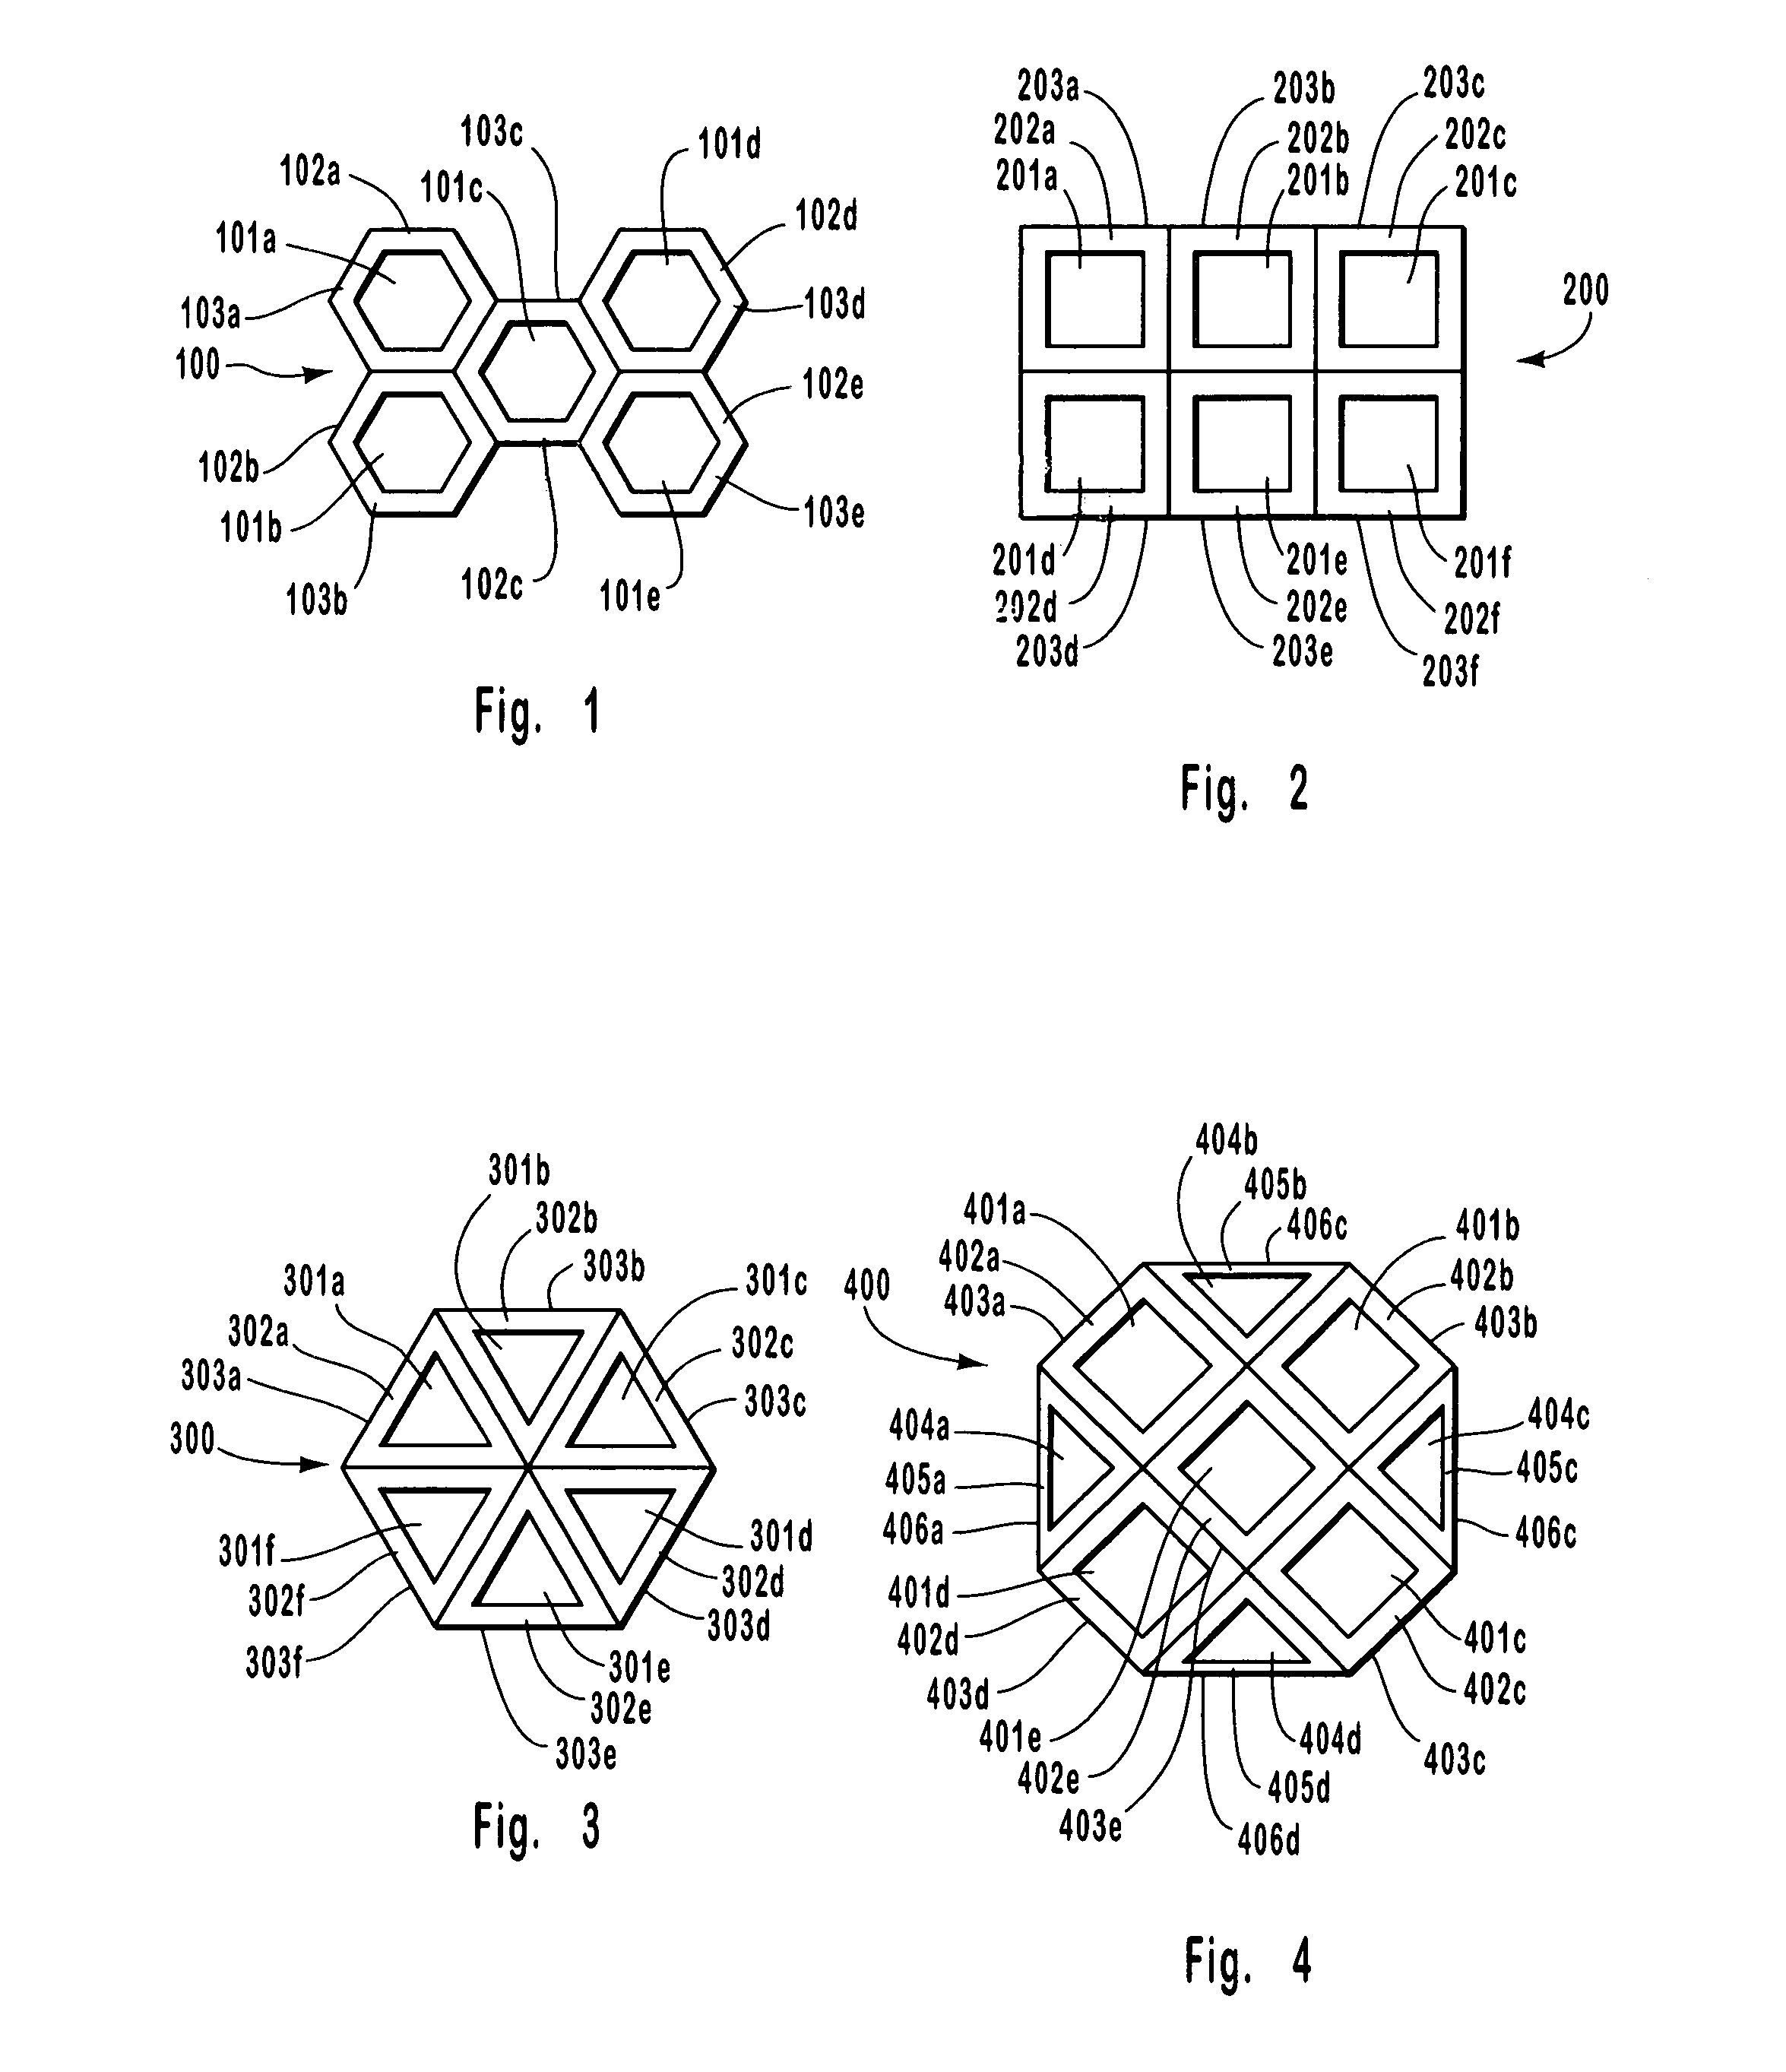 PDC interface incorporating a closed network of features